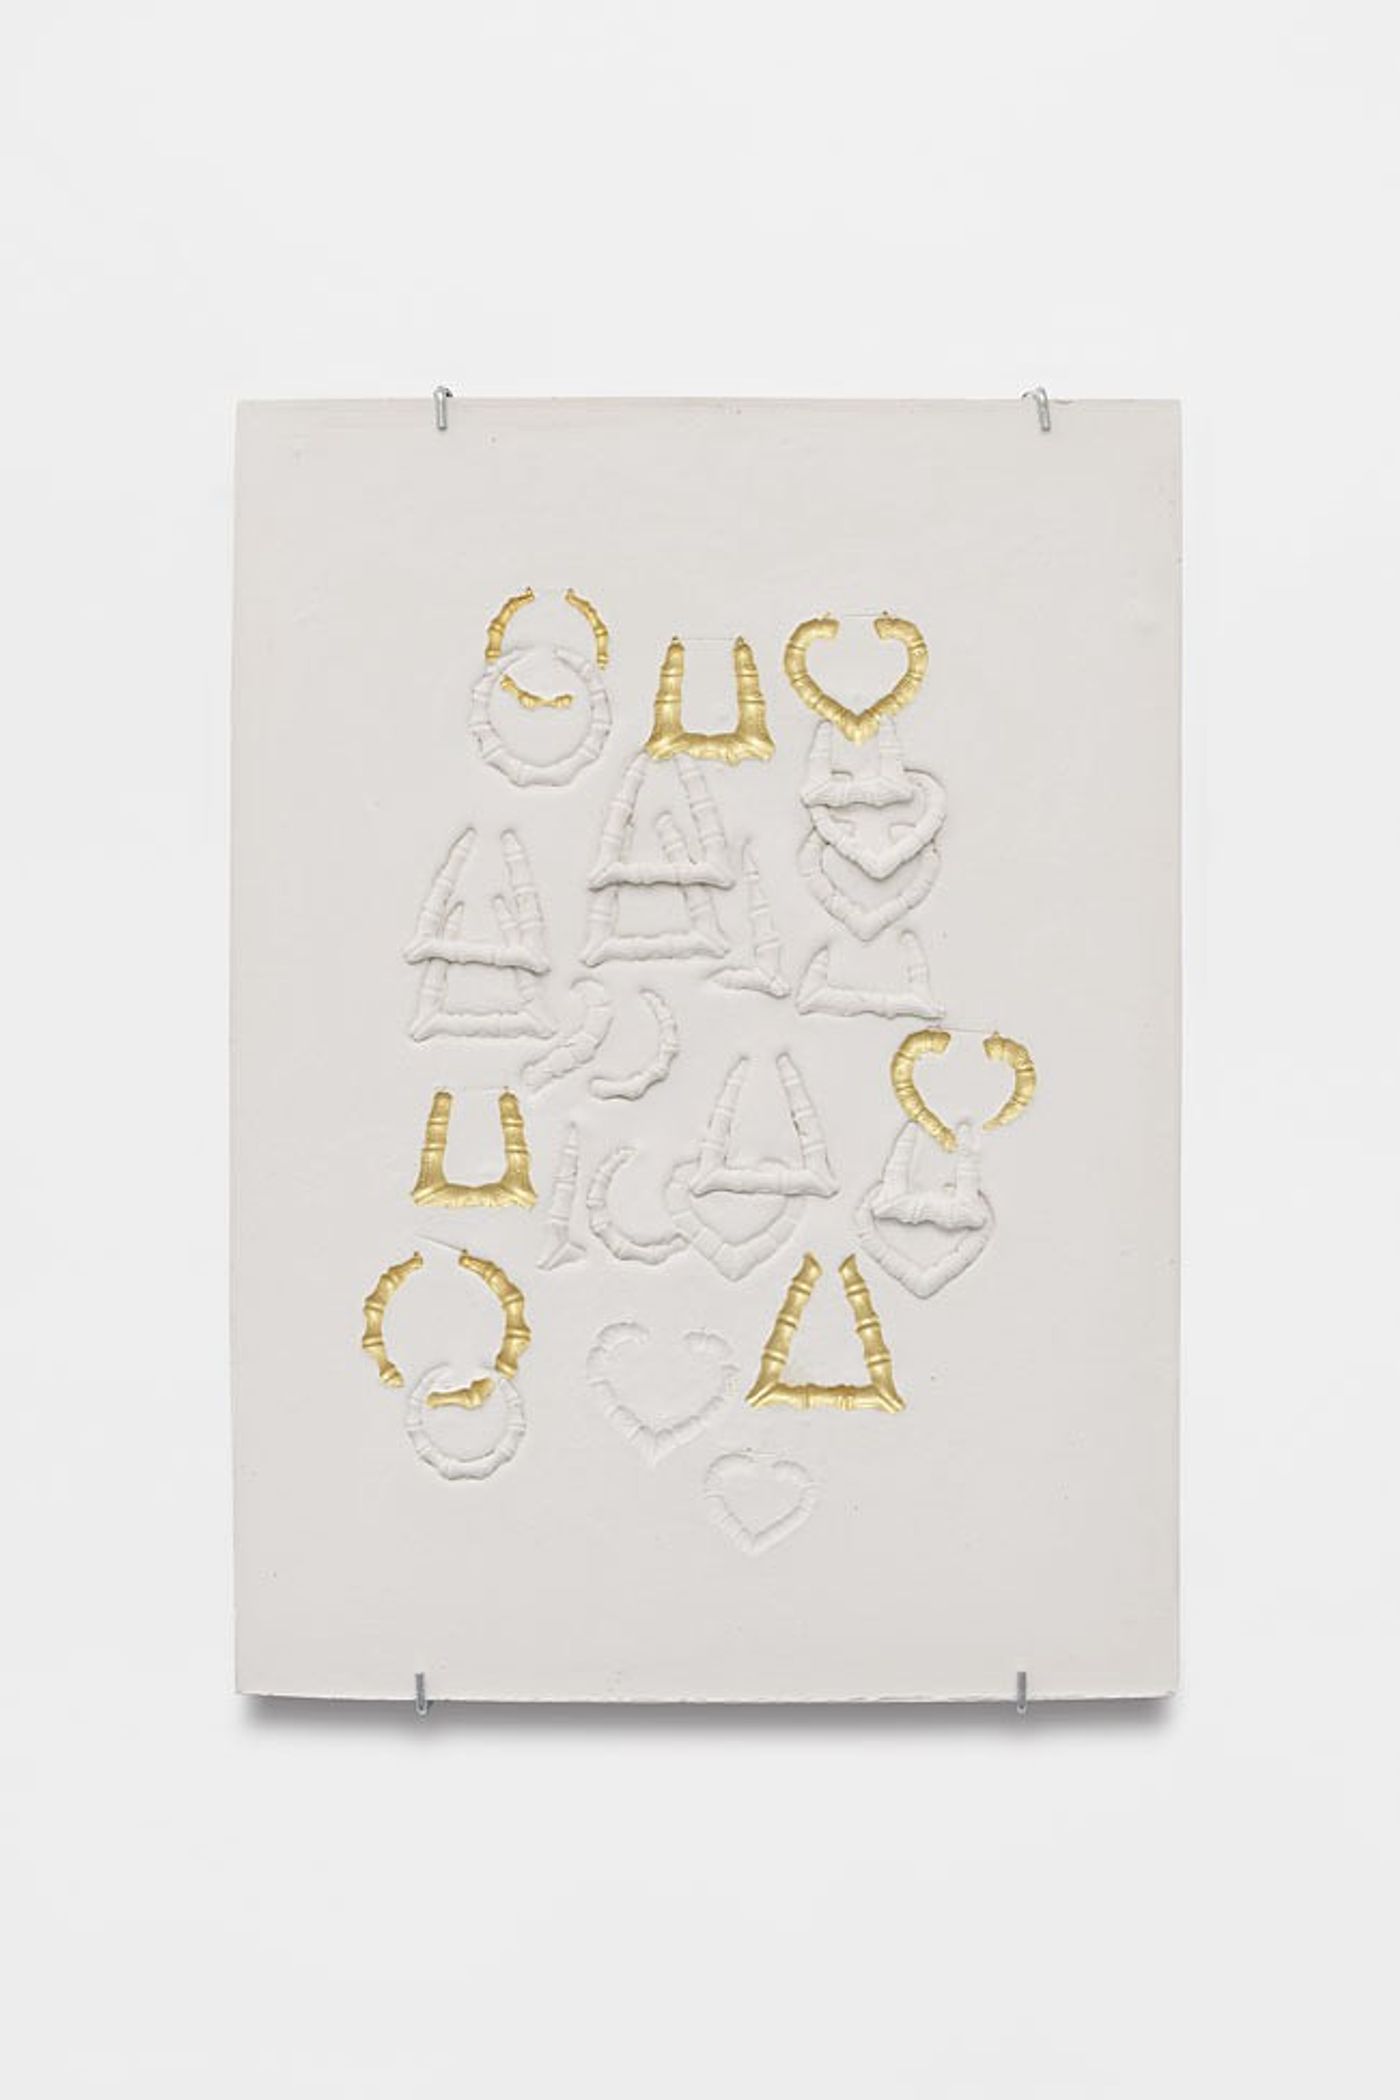 Image of Medium Composition with Doorknocker Earrings, Heart Earrings and Round Earrings with Seven Gold Impressions, 2021: Plaster and acrylic